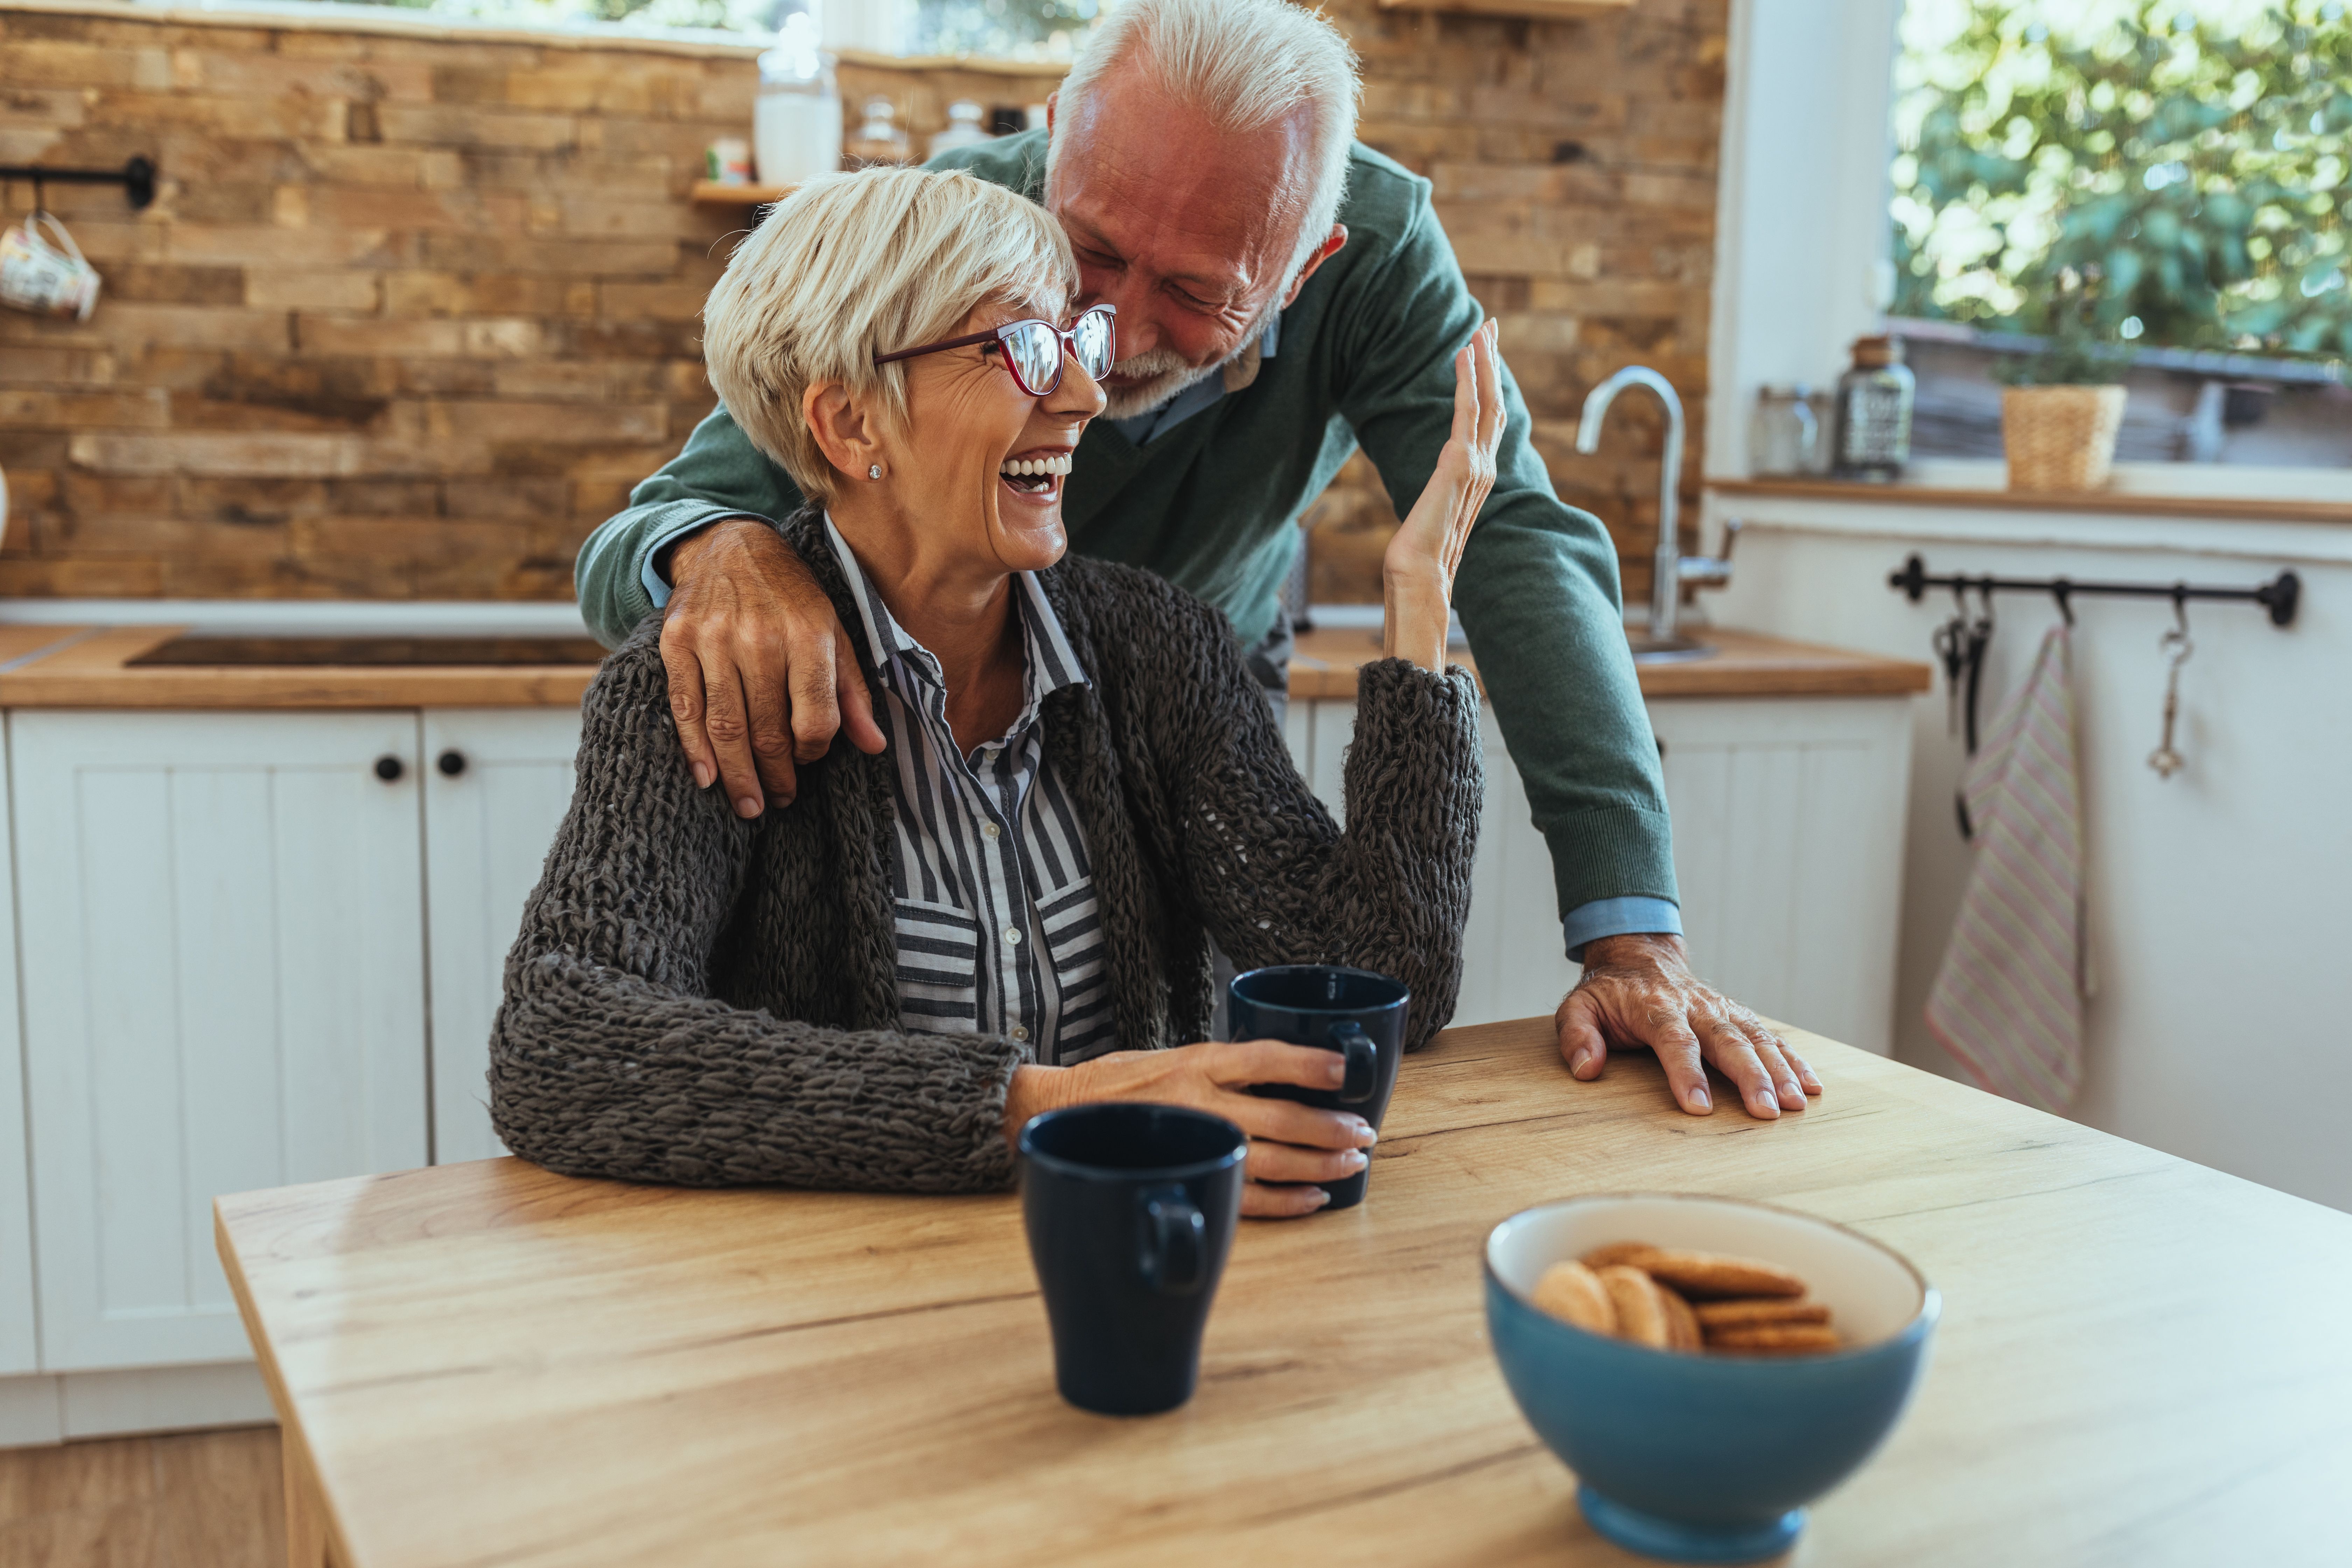 An elder couple smiling in the kitchen. | Source: Shutterstock